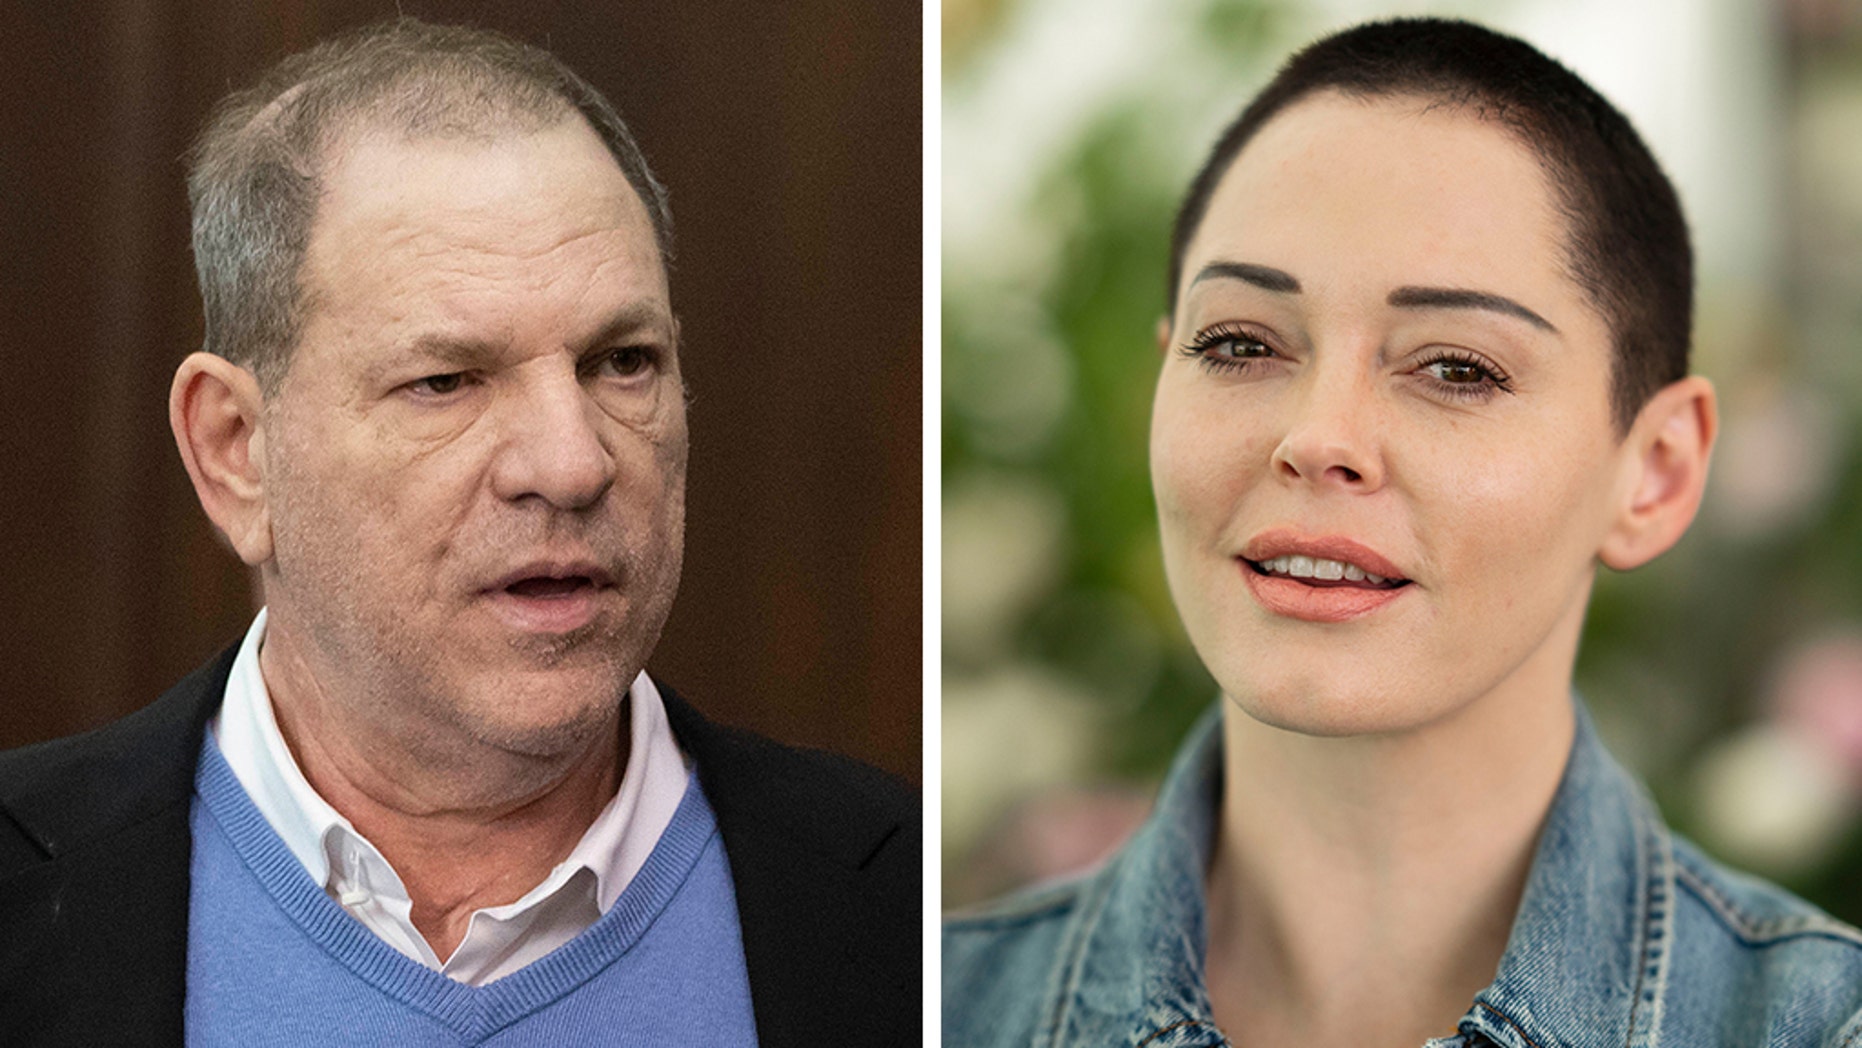 Harvey Weinstein has new legal team, including a former lawyer for accuser Rose McGowan